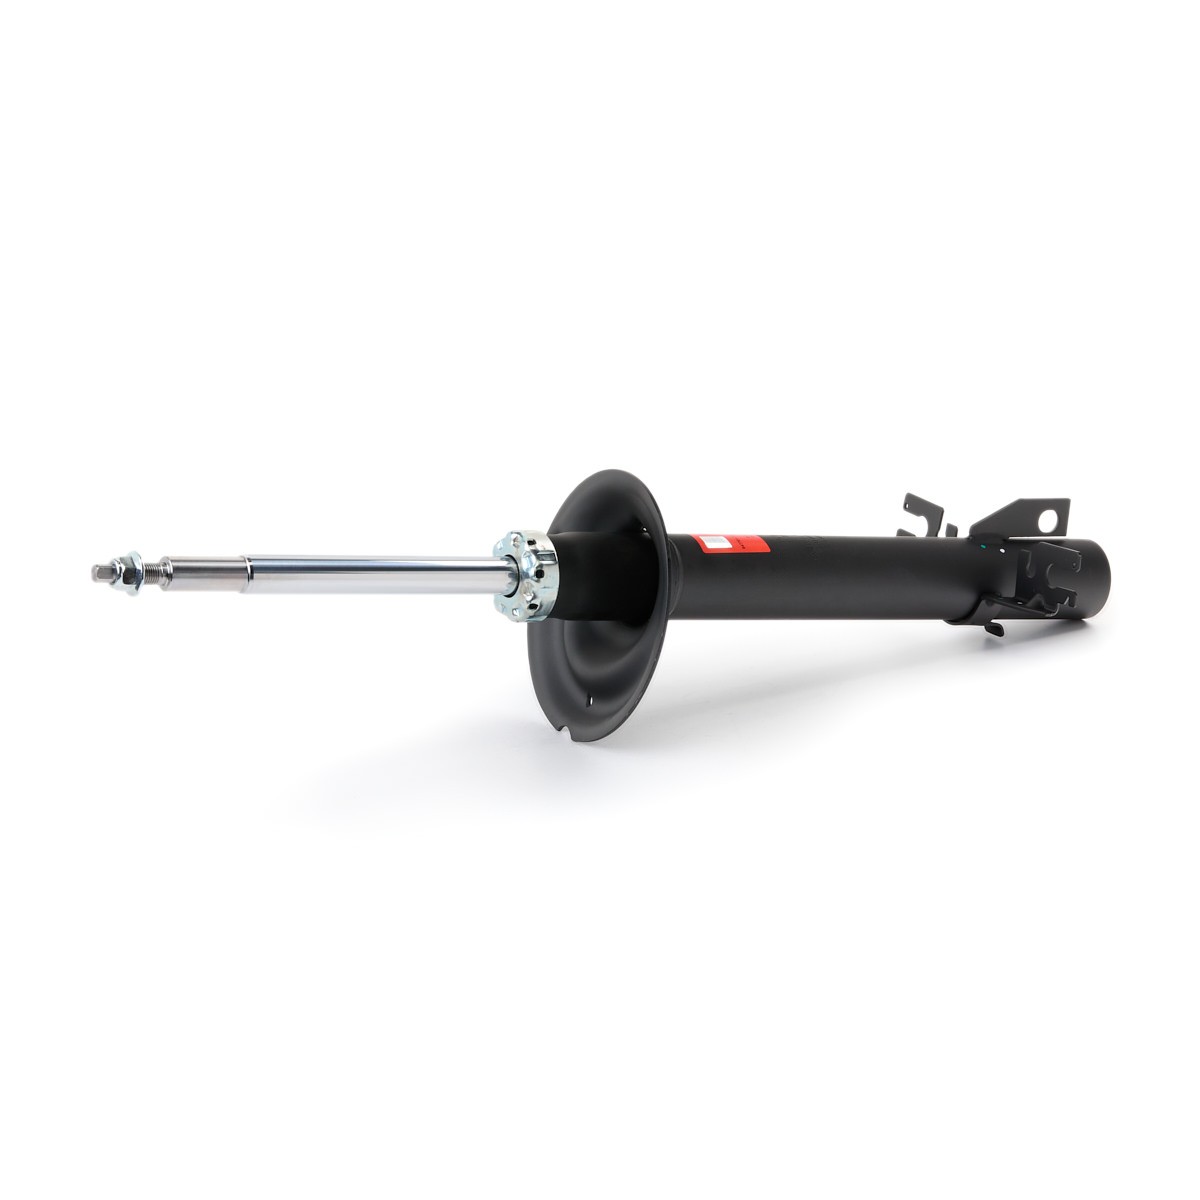 TRW JGM1050S Shock absorber Front Axle, Gas Pressure, Twin-Tube, Suspension Strut, Top pin, SINGLE